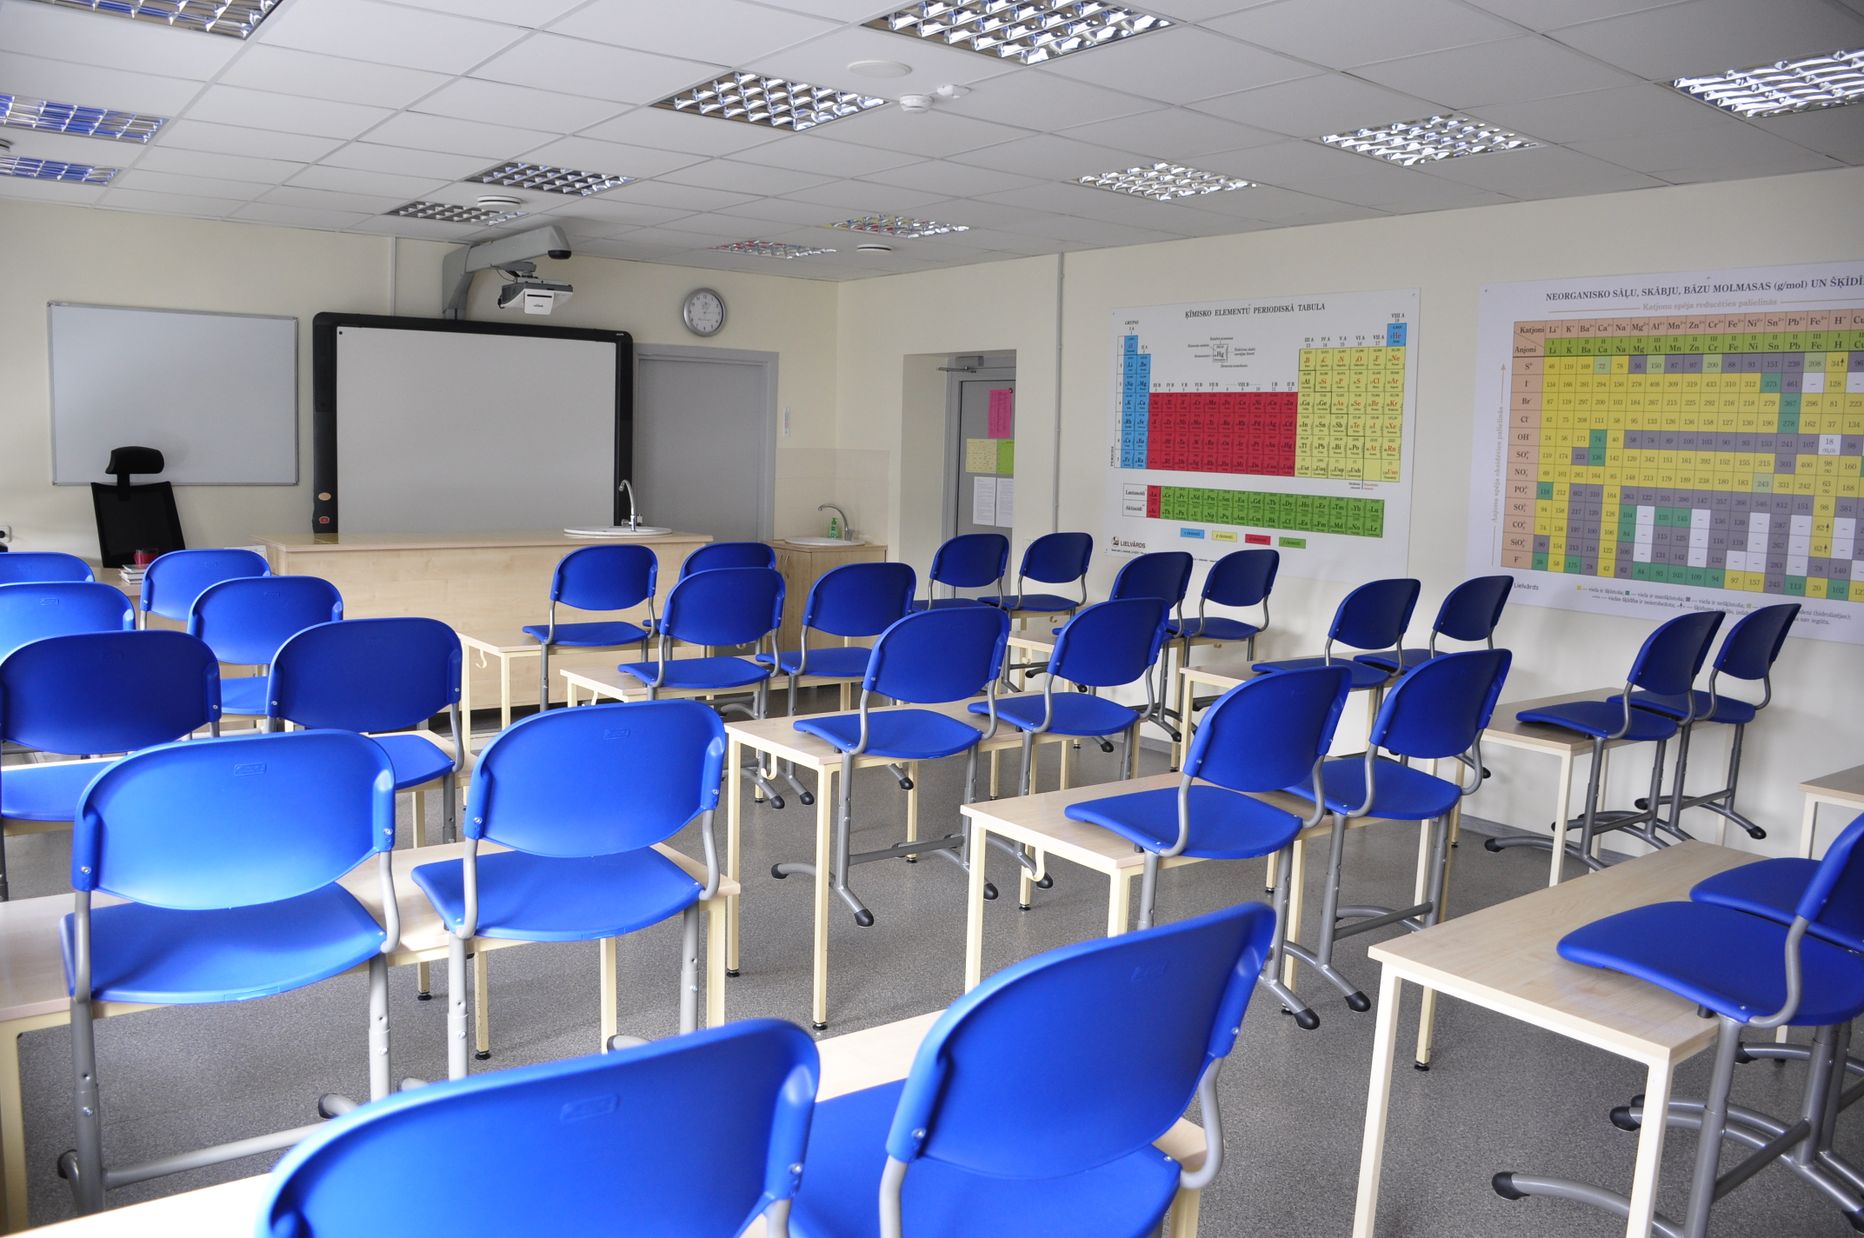 An empty classroom in the closed Daugavpils State Gymnasium in connection with the disease "Covid-19" caused by the coronavirus.